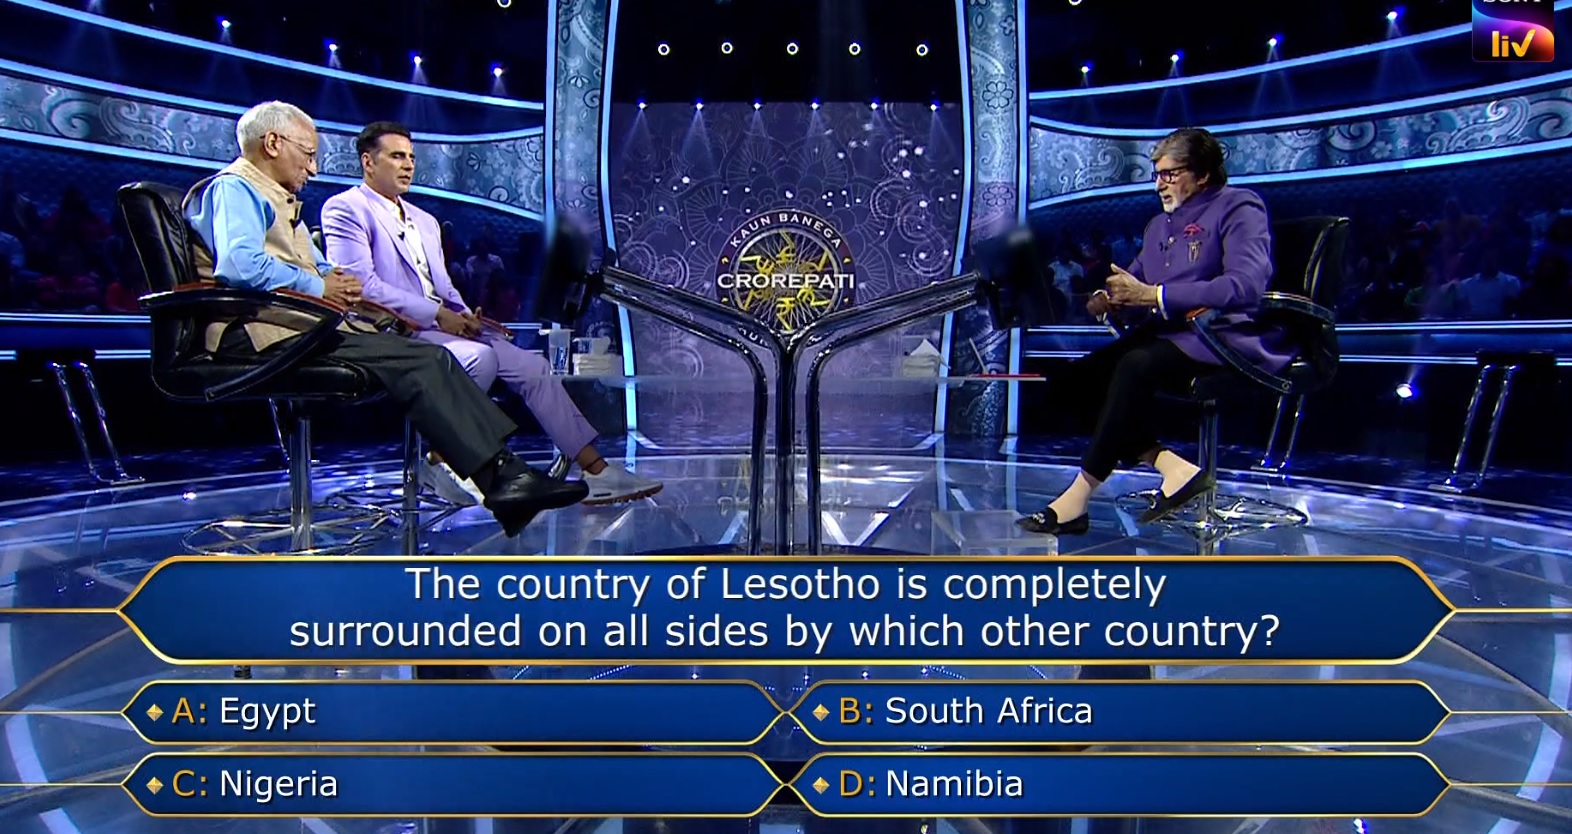 Ques : The country of Lesotho is completely surrounded on all sides by which other country?